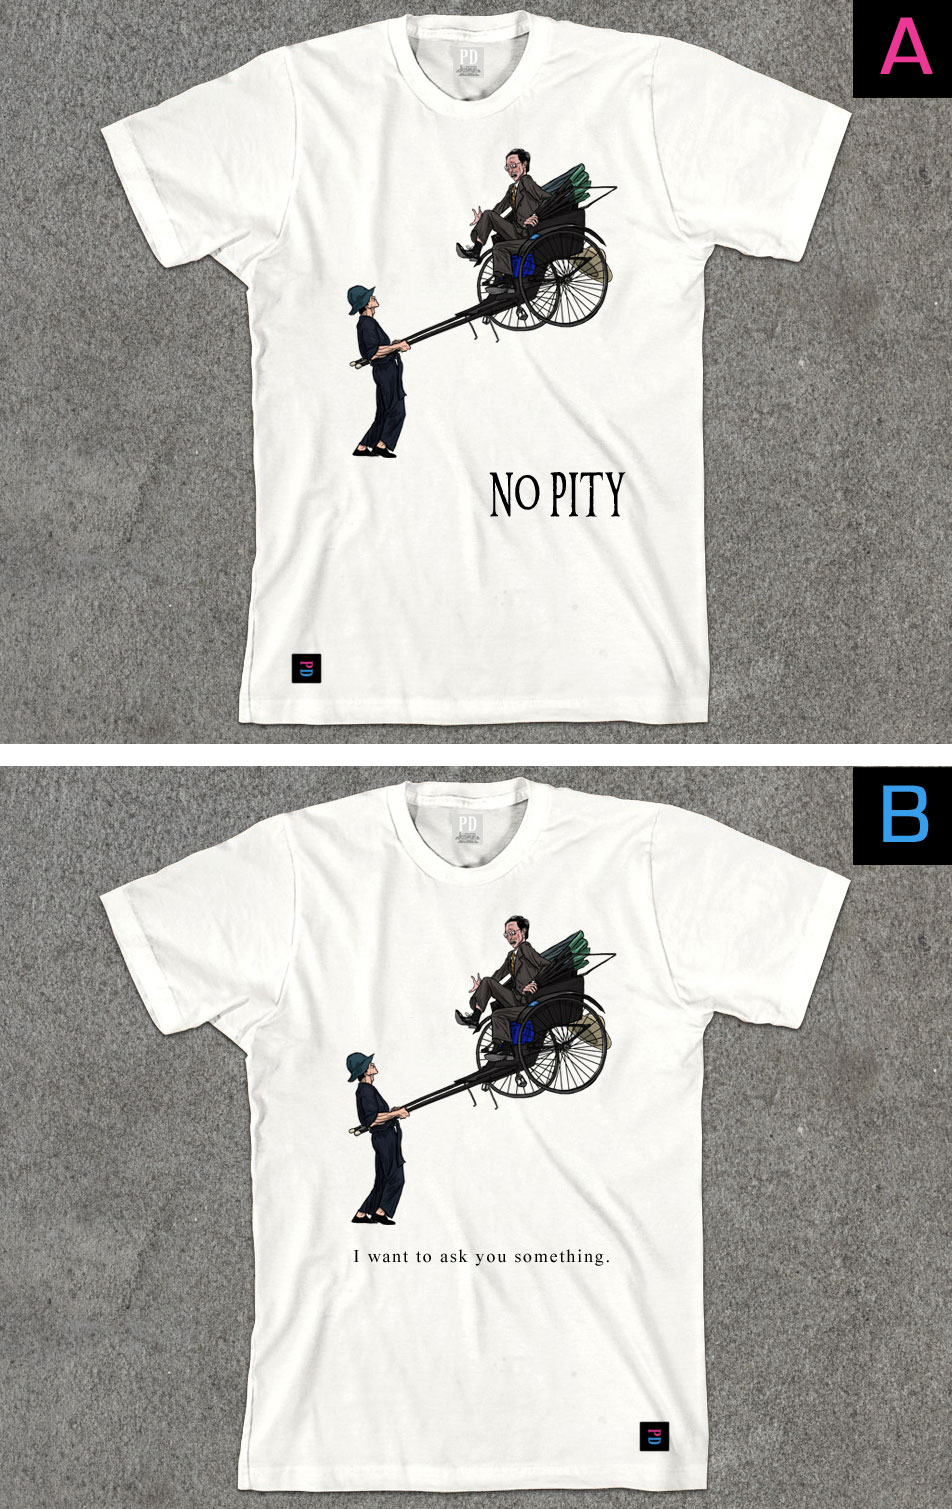 No Pity & I Want to Ask You Something PD T-Shirt designs by Marten Go aka MGO